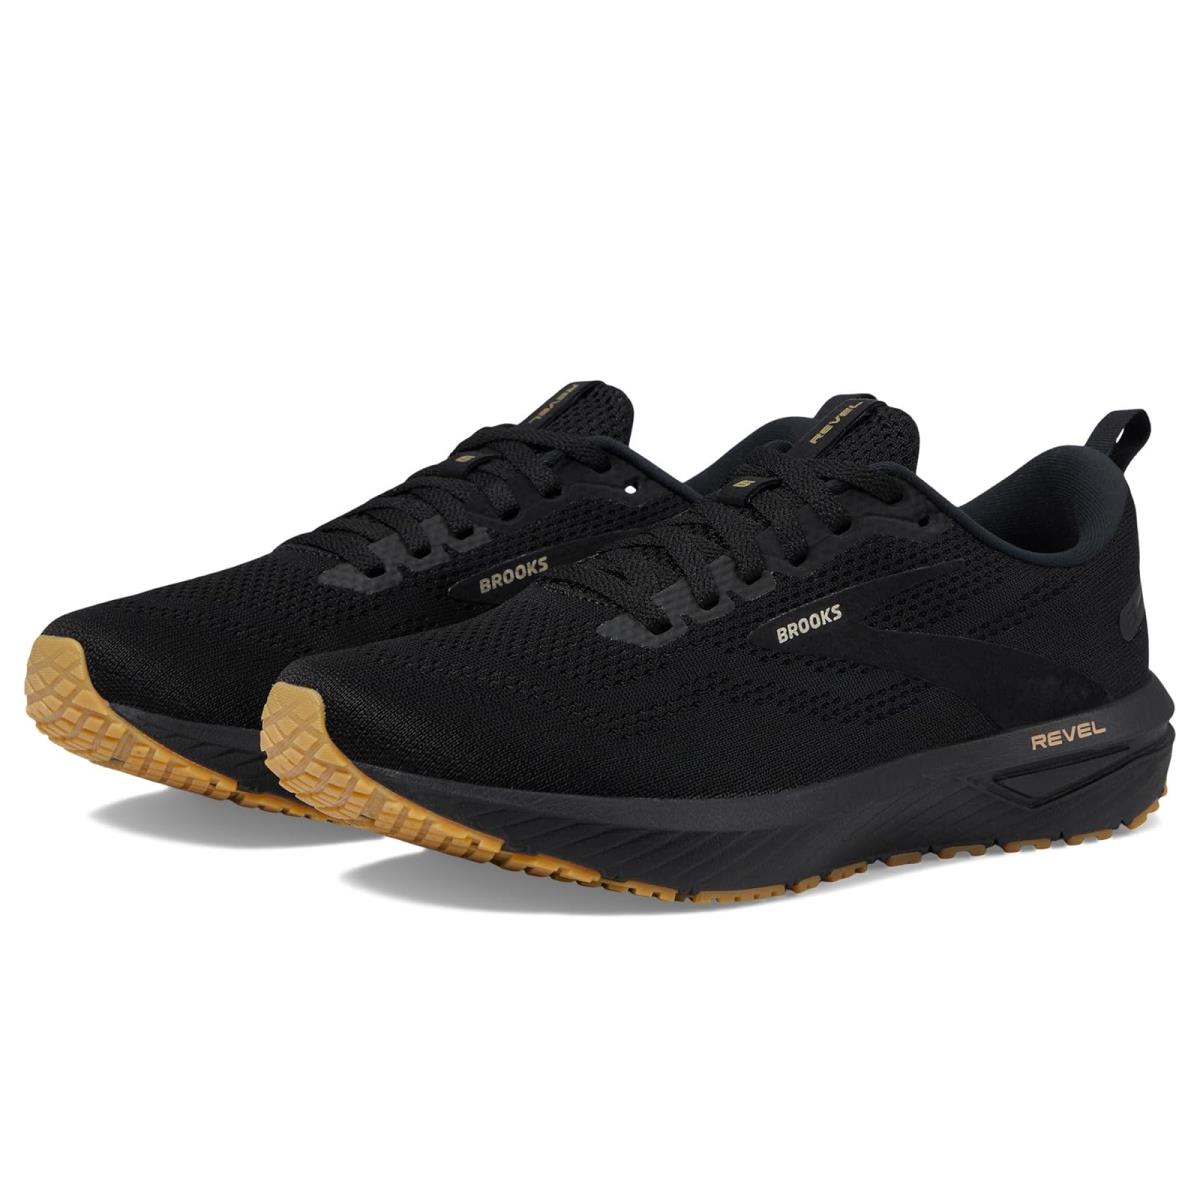 Man`s Sneakers Athletic Shoes Brooks Revel 6 Black/Cream/Biscuit